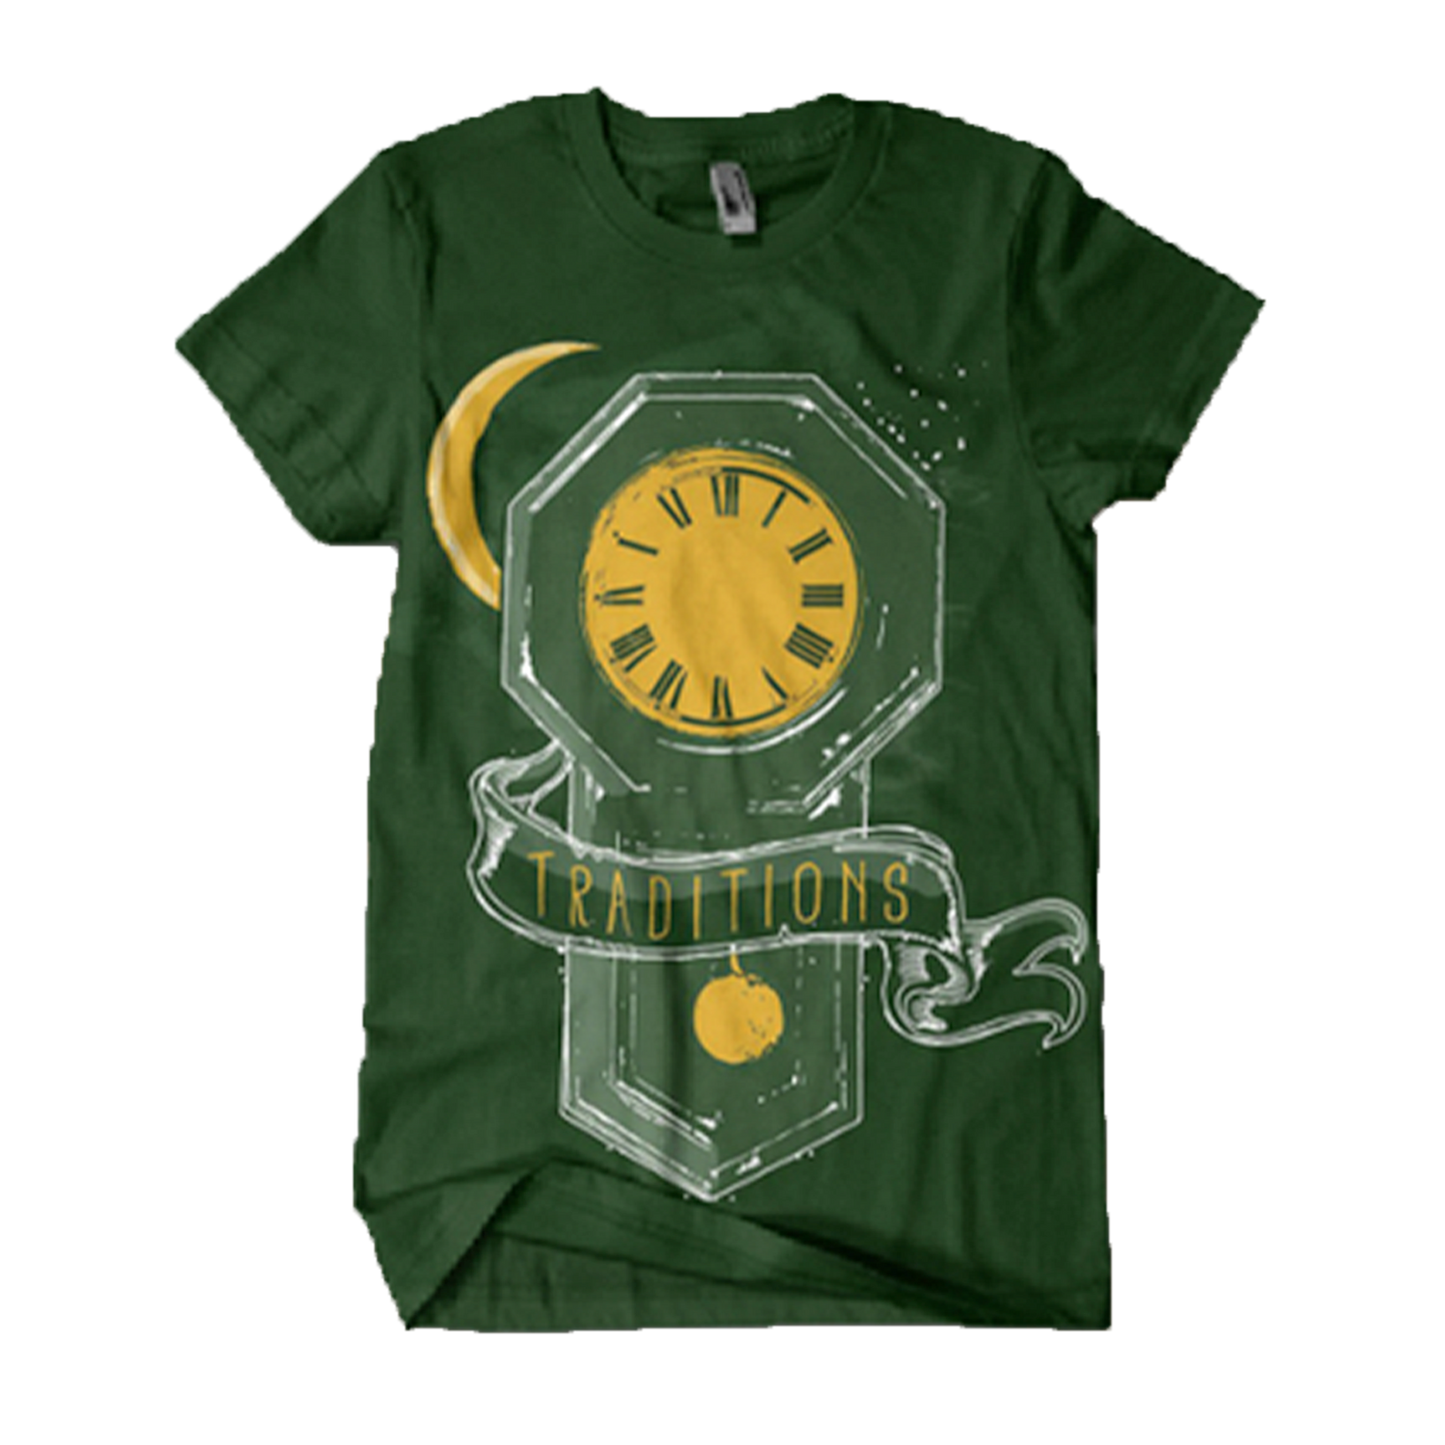 Traditions - "Time" T-Shirt